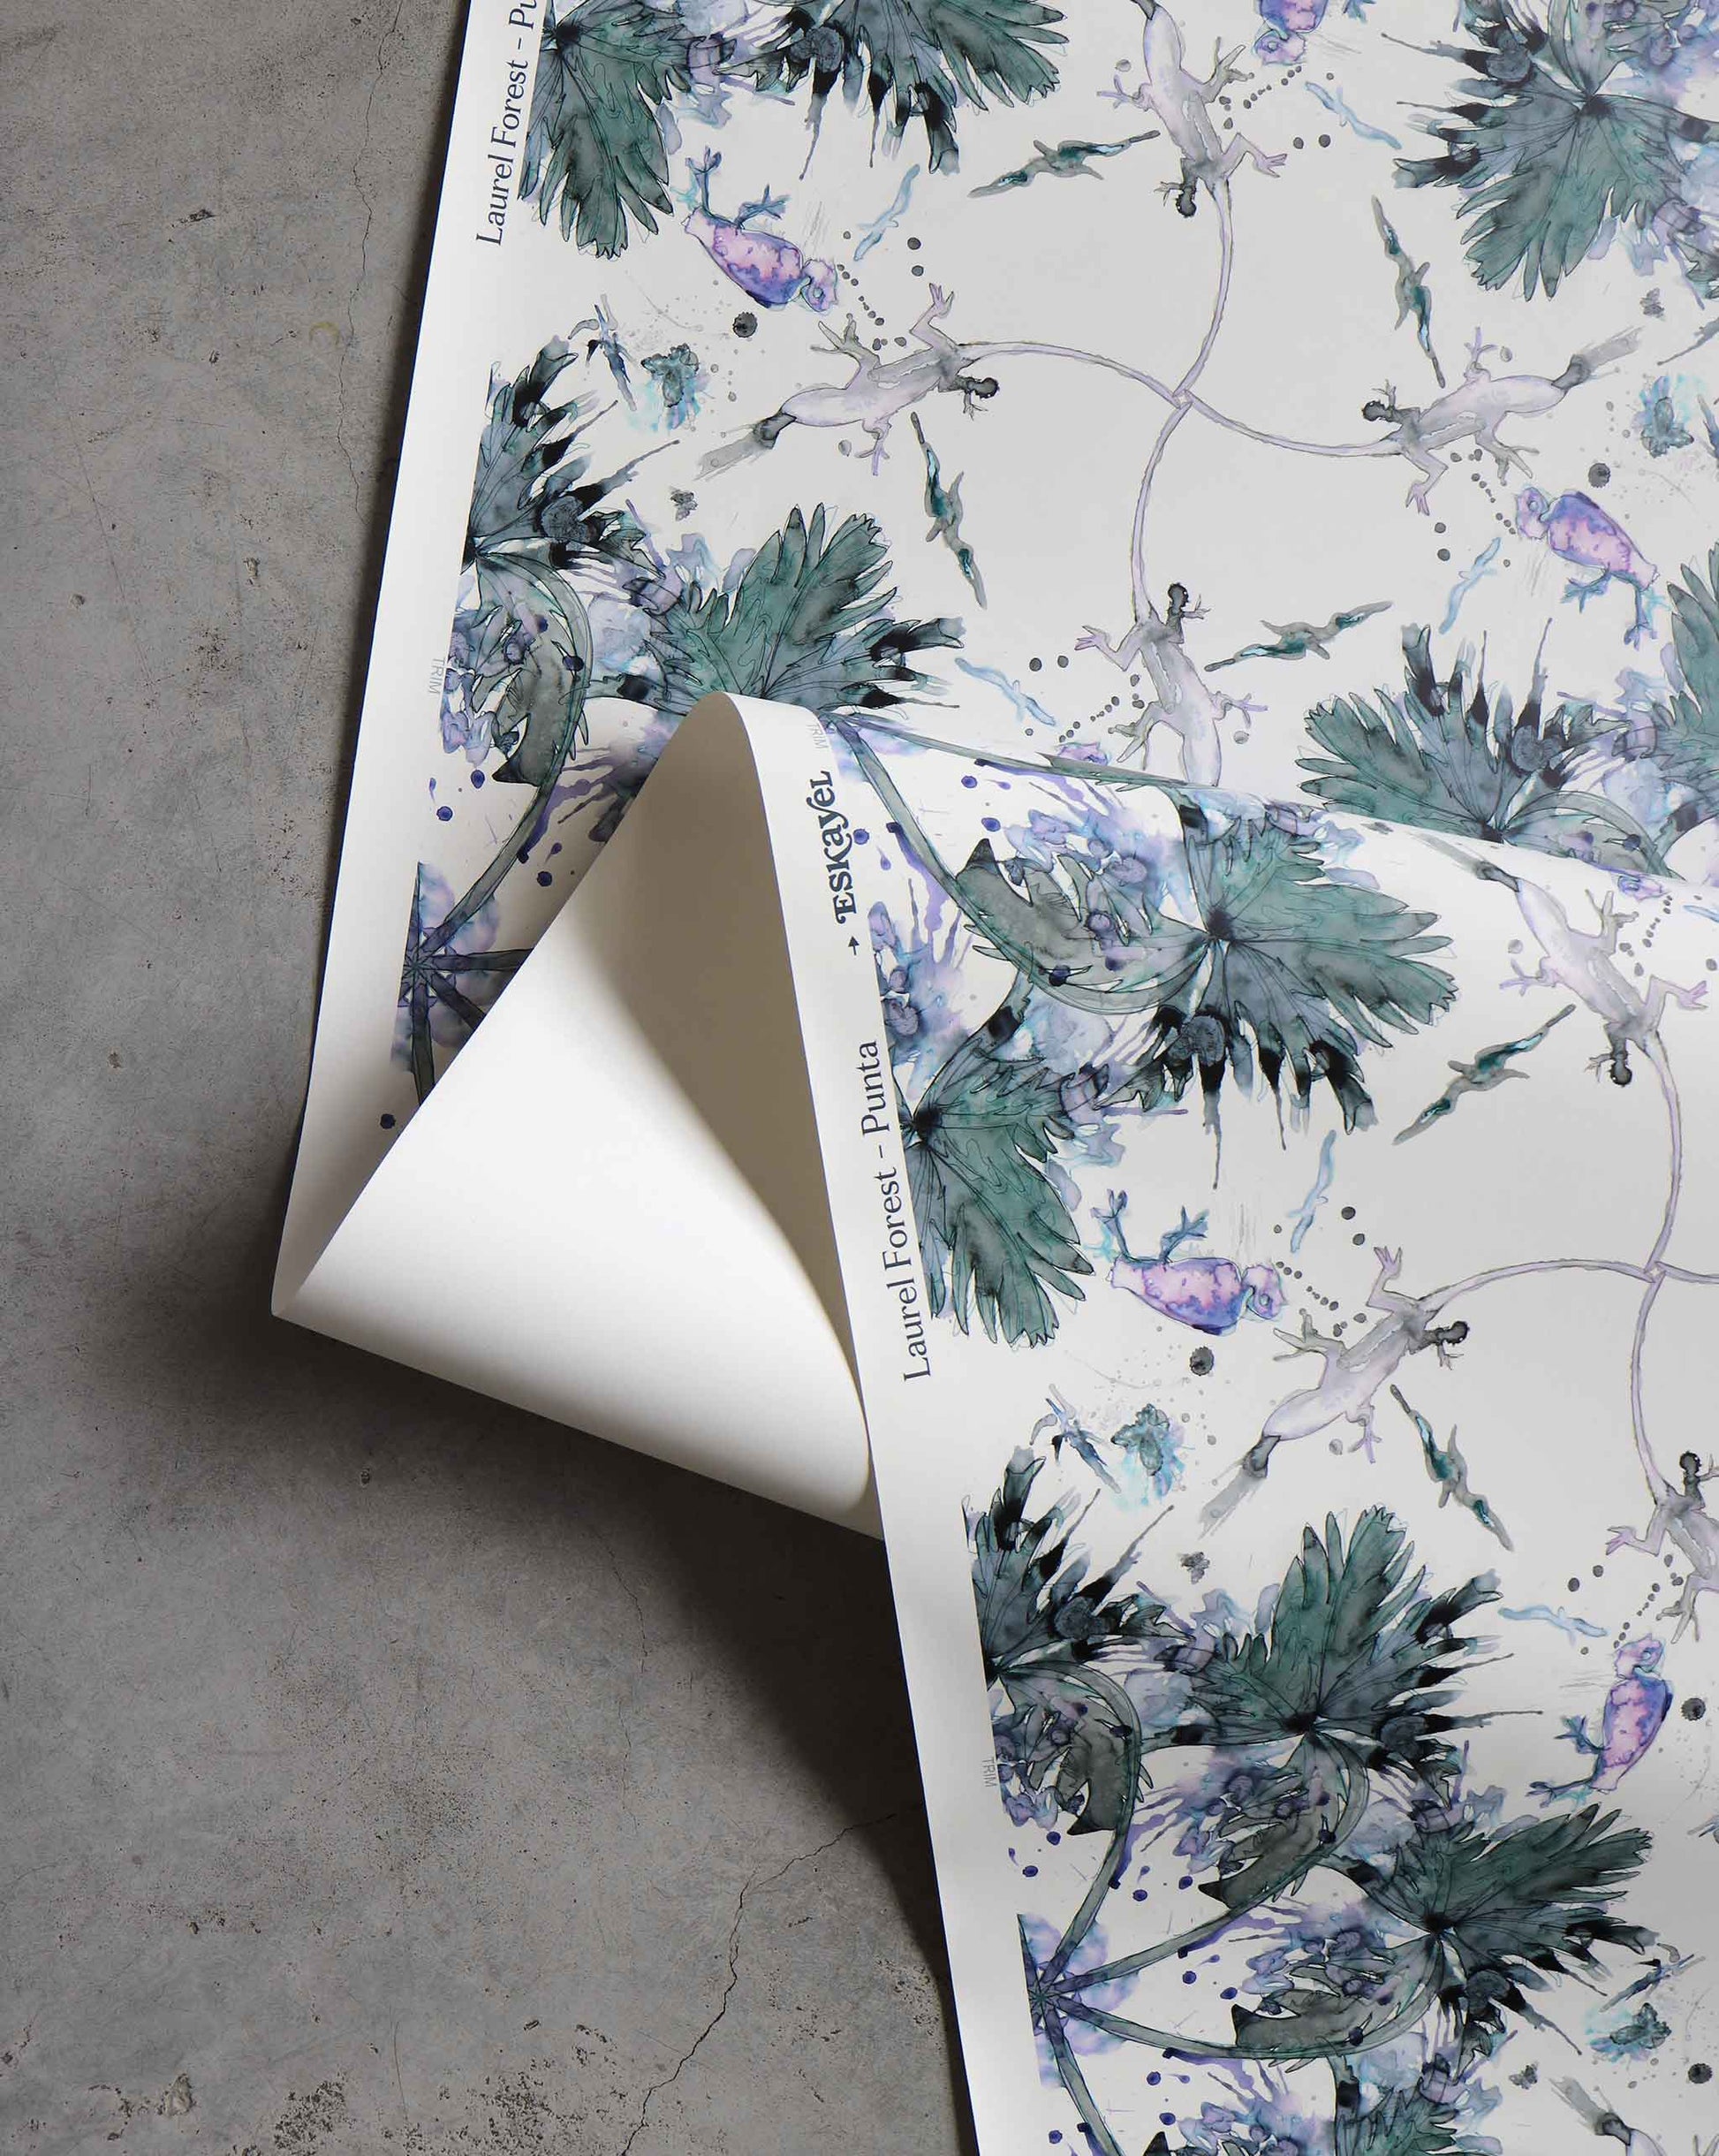 A close-up of a rolled-up Laurel Forest Wallpaper||Punta with a green and purple leafy design, partially unrolled on a gray surface, evokes the elegance of high-end wallpaper.